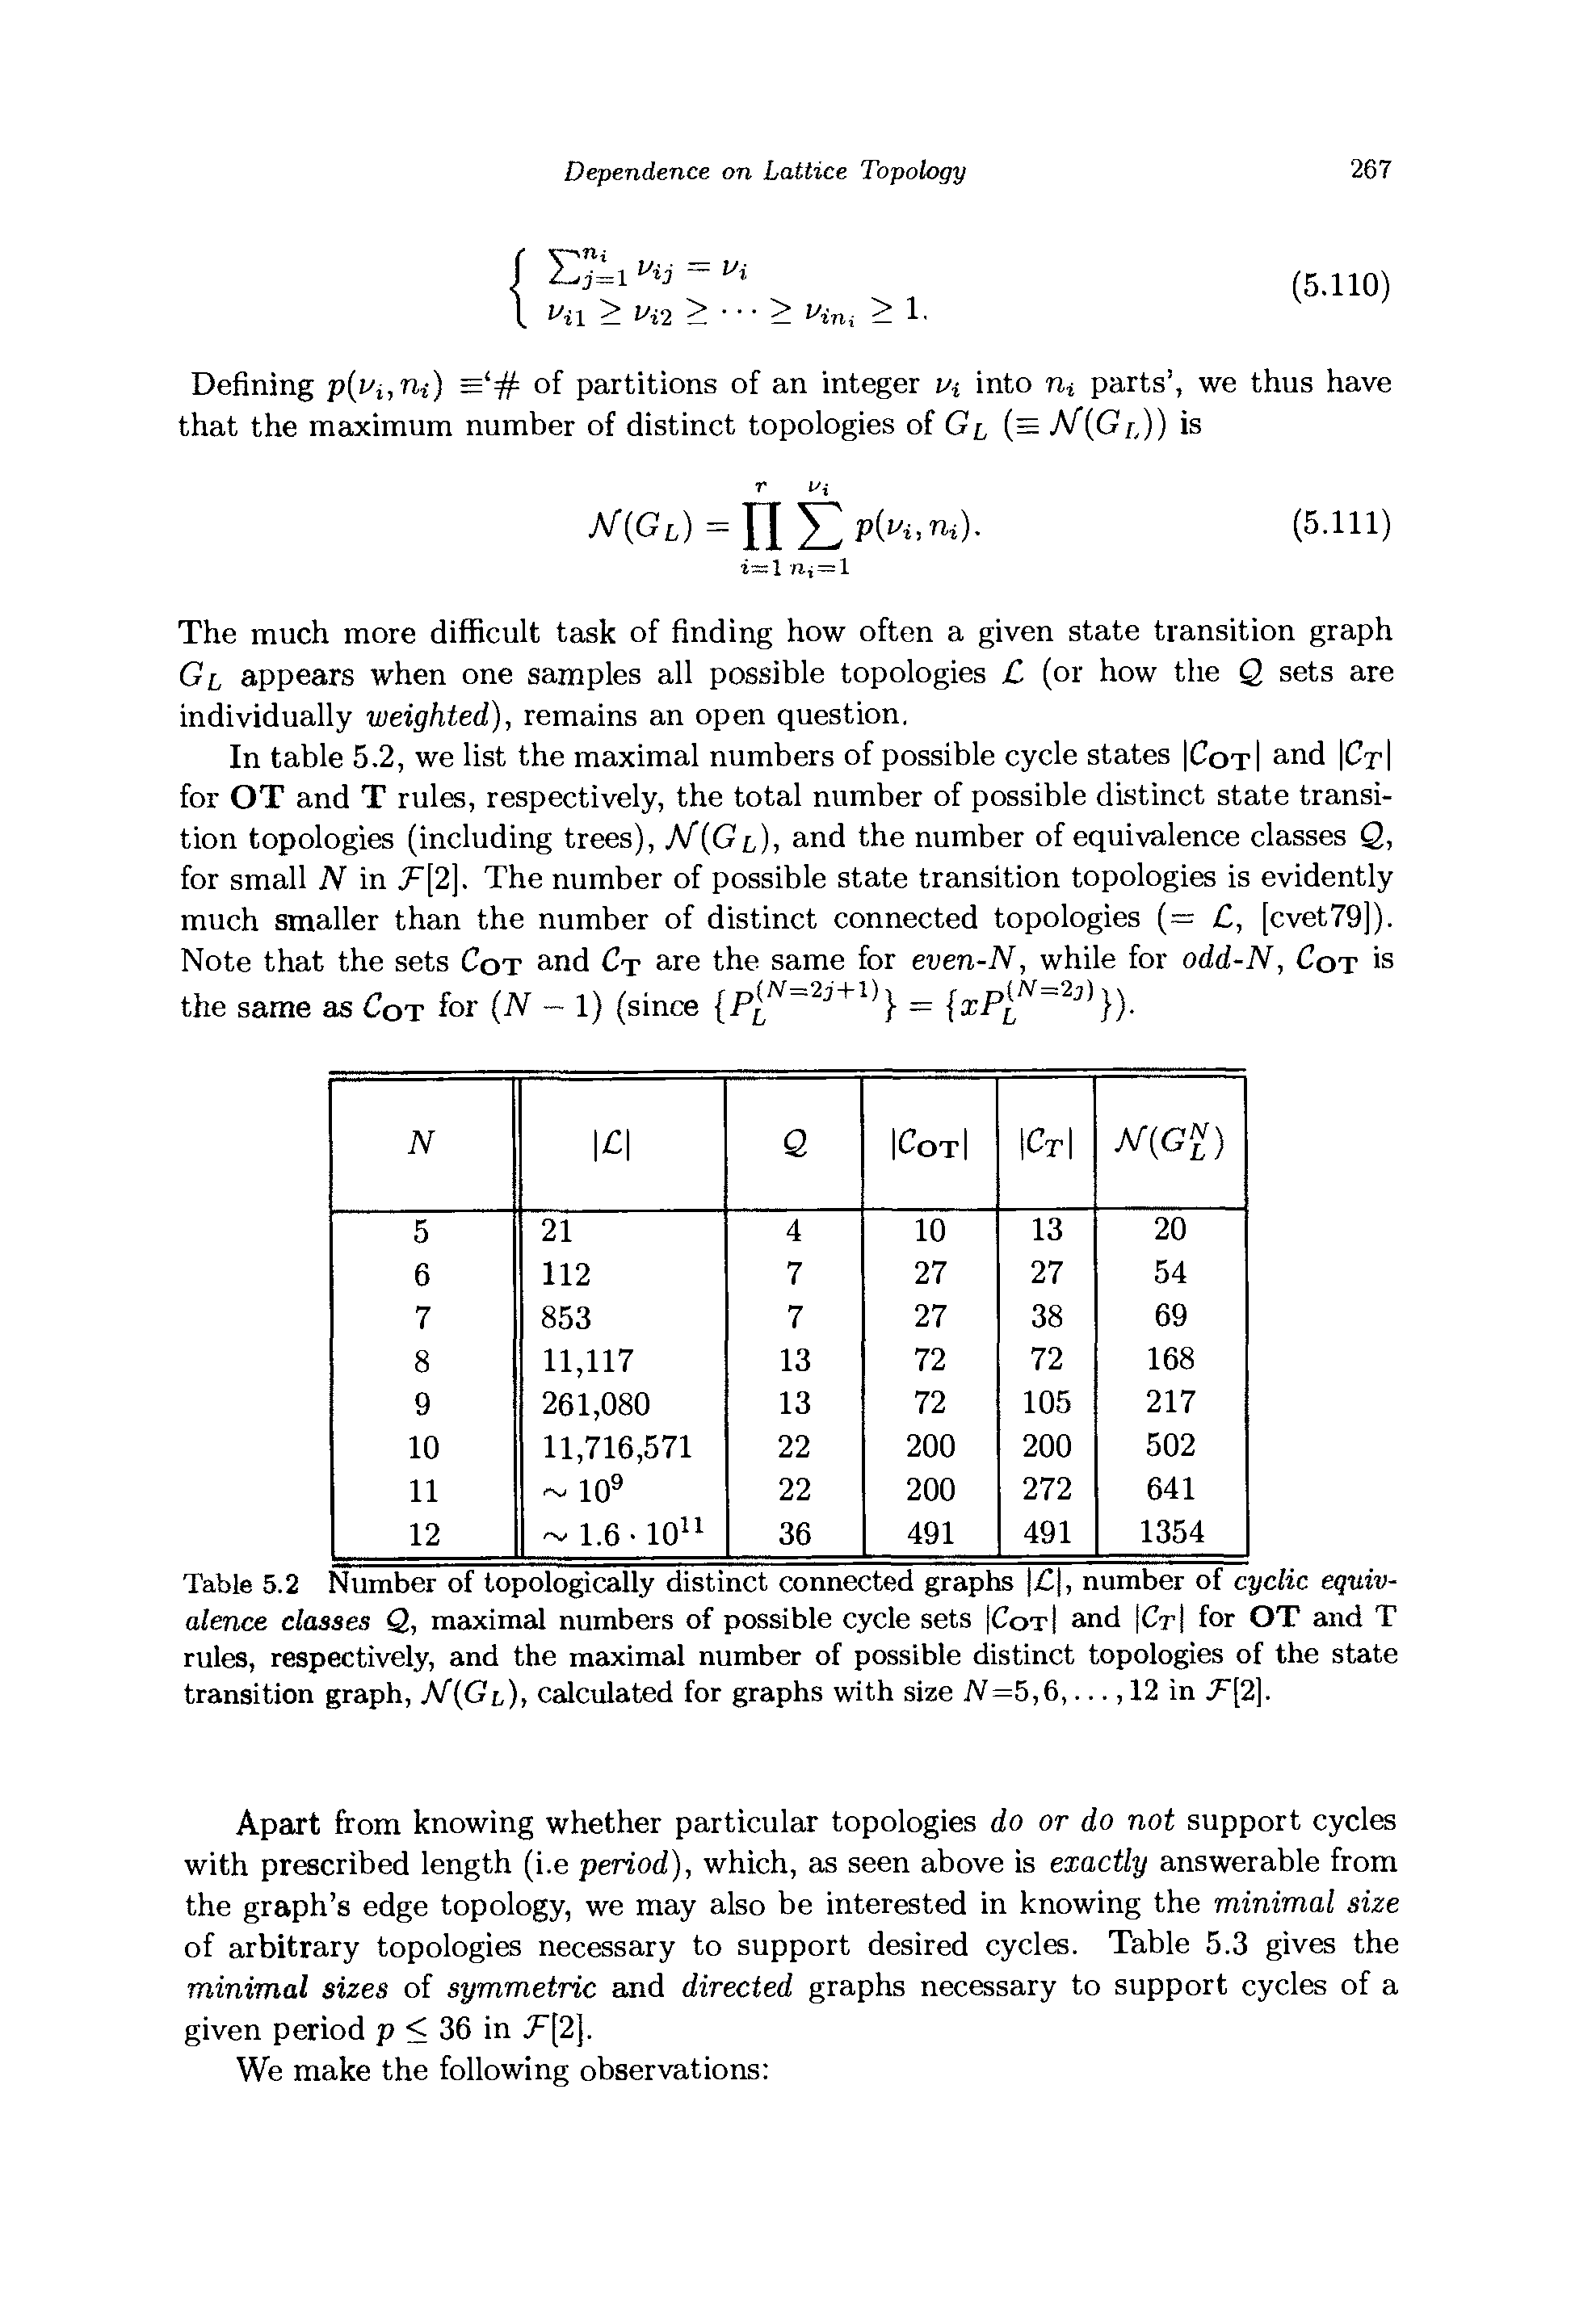 Table 5.2 Number of topologically distinct connected graphs ) ), number of cyclic equivalence classes Q, maximal numbers of possible cycle sets Cot and Ct for OT and T rules, respectively, and the maximal number of possible distinct topologies of the state transition graph, calculated for graphs with size fV=5,6,..., 12 in T 2. ...